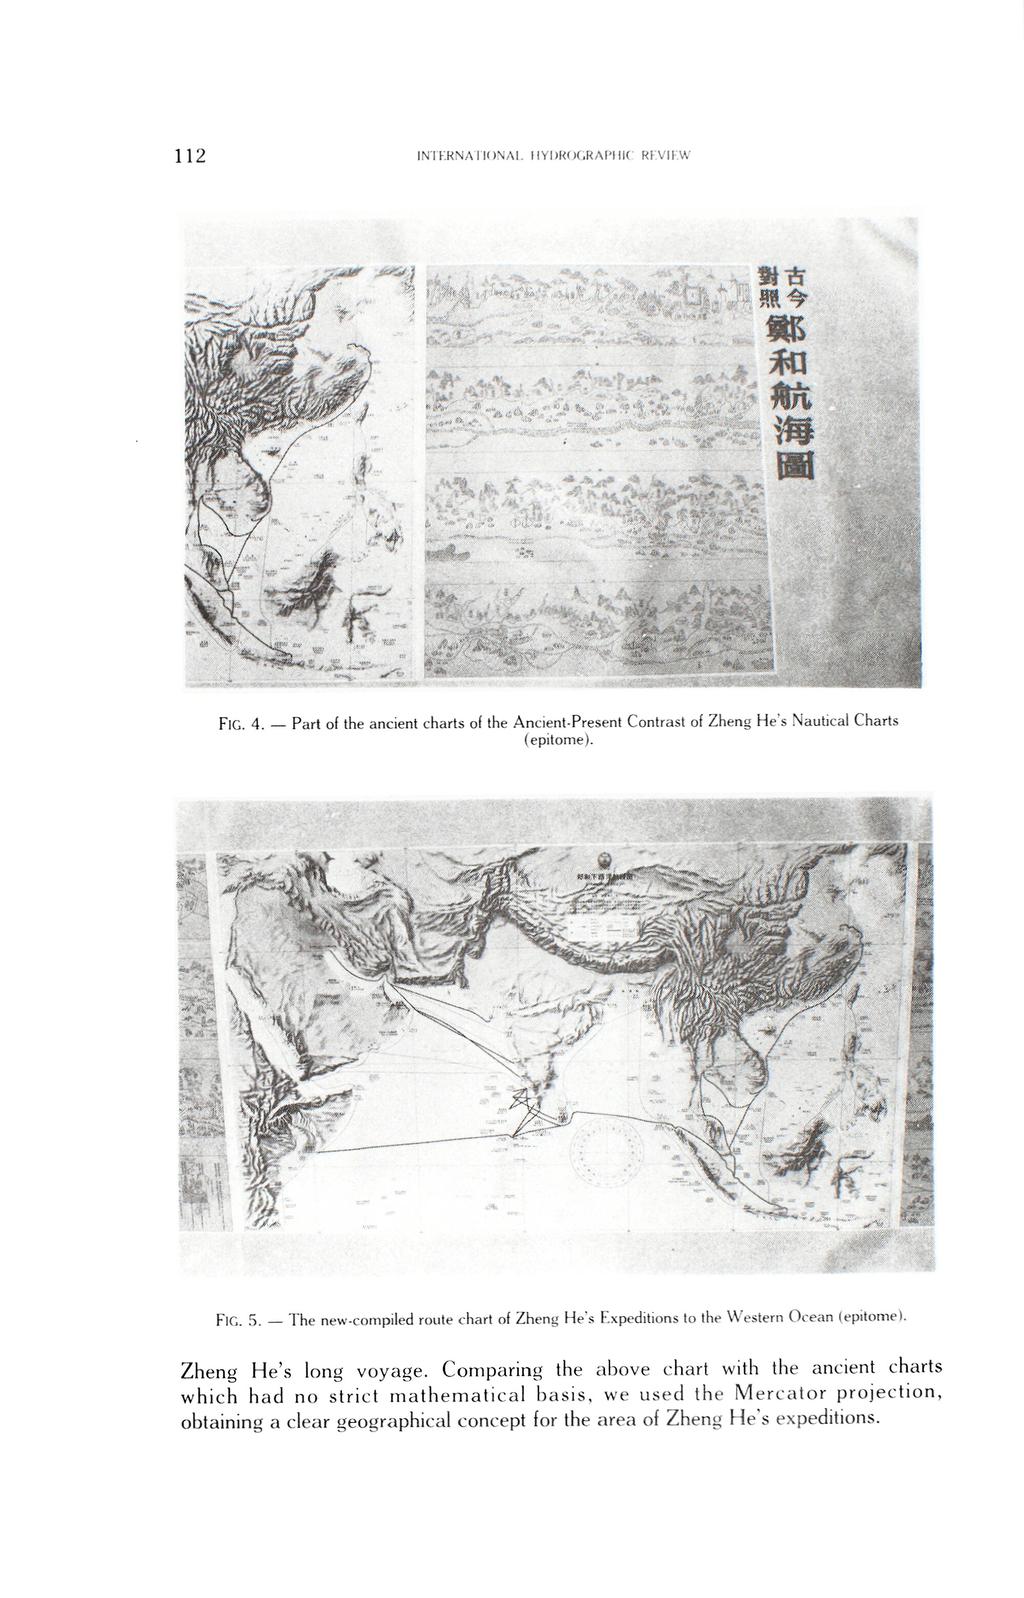 i f- l H t e t f f a. * W0M Fig. 4. Part o( the ancient charts o( the Ancient-Present Contrast of Zheng He s Nautical Charts (epitome). FlG. 5. The new-compiled route chart of Zheng He s F.